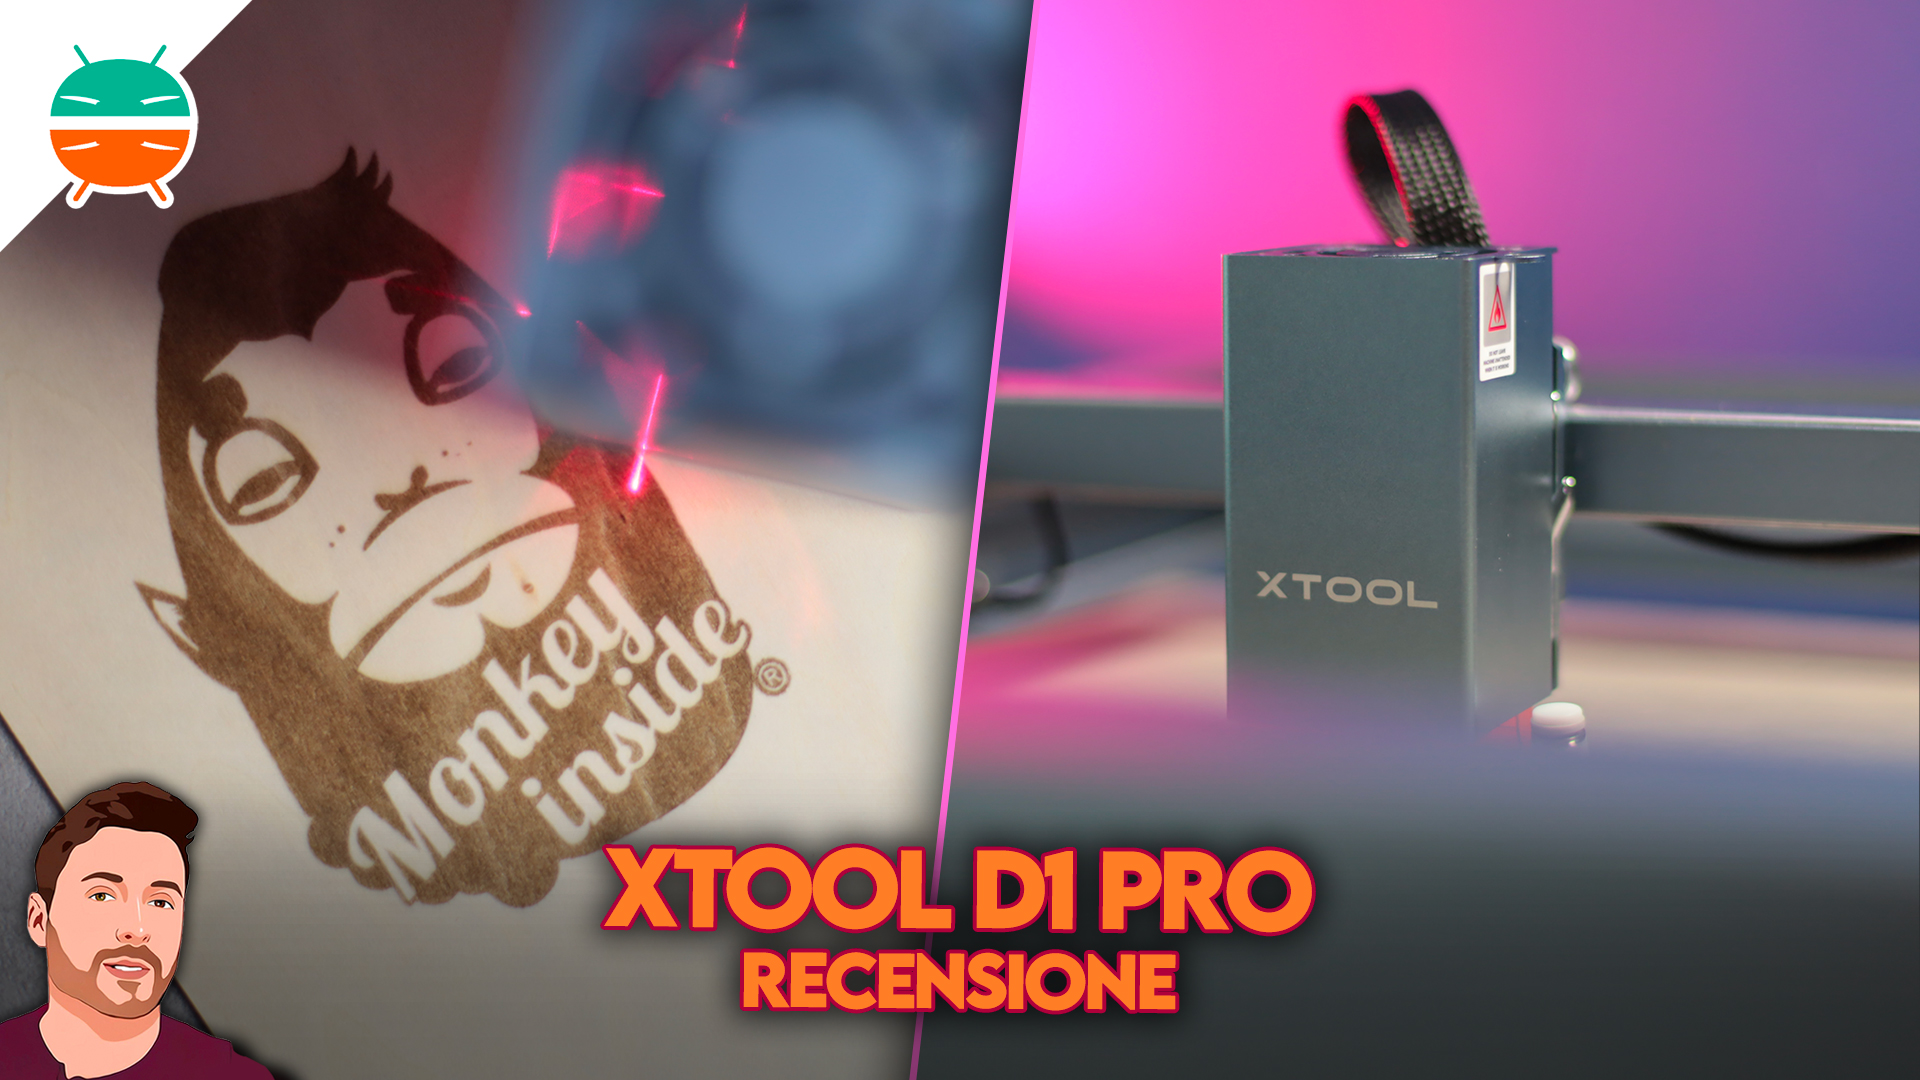 xTool D1 Pro review: a Pro laser engraver in every sense - GizChina.it